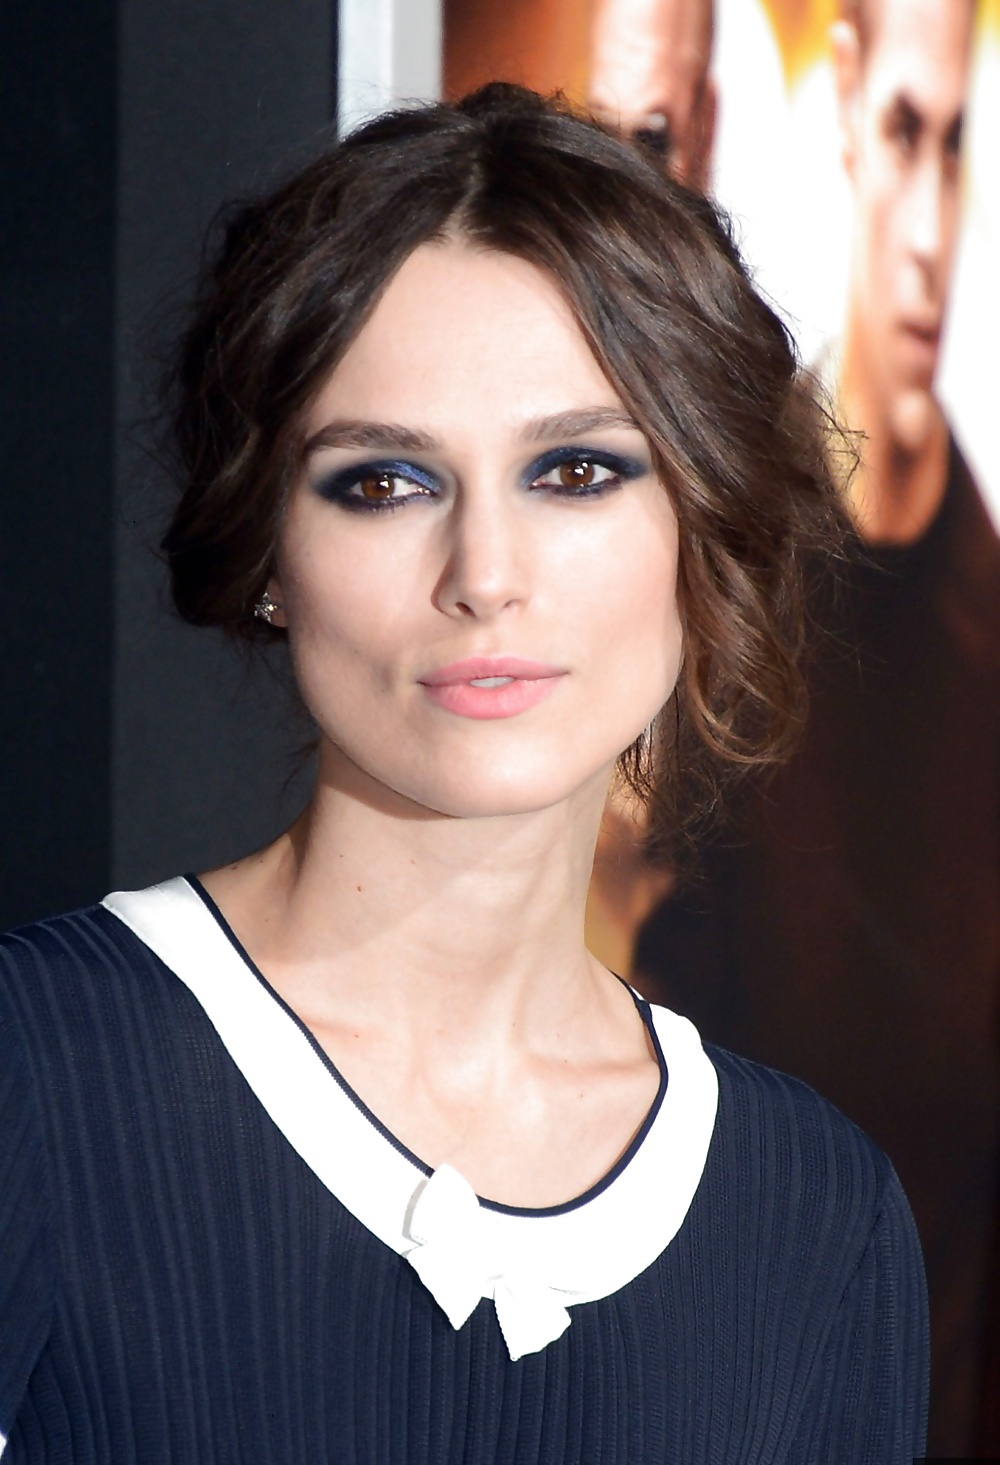 Keira Knightley The Royal Lady of England #35649863